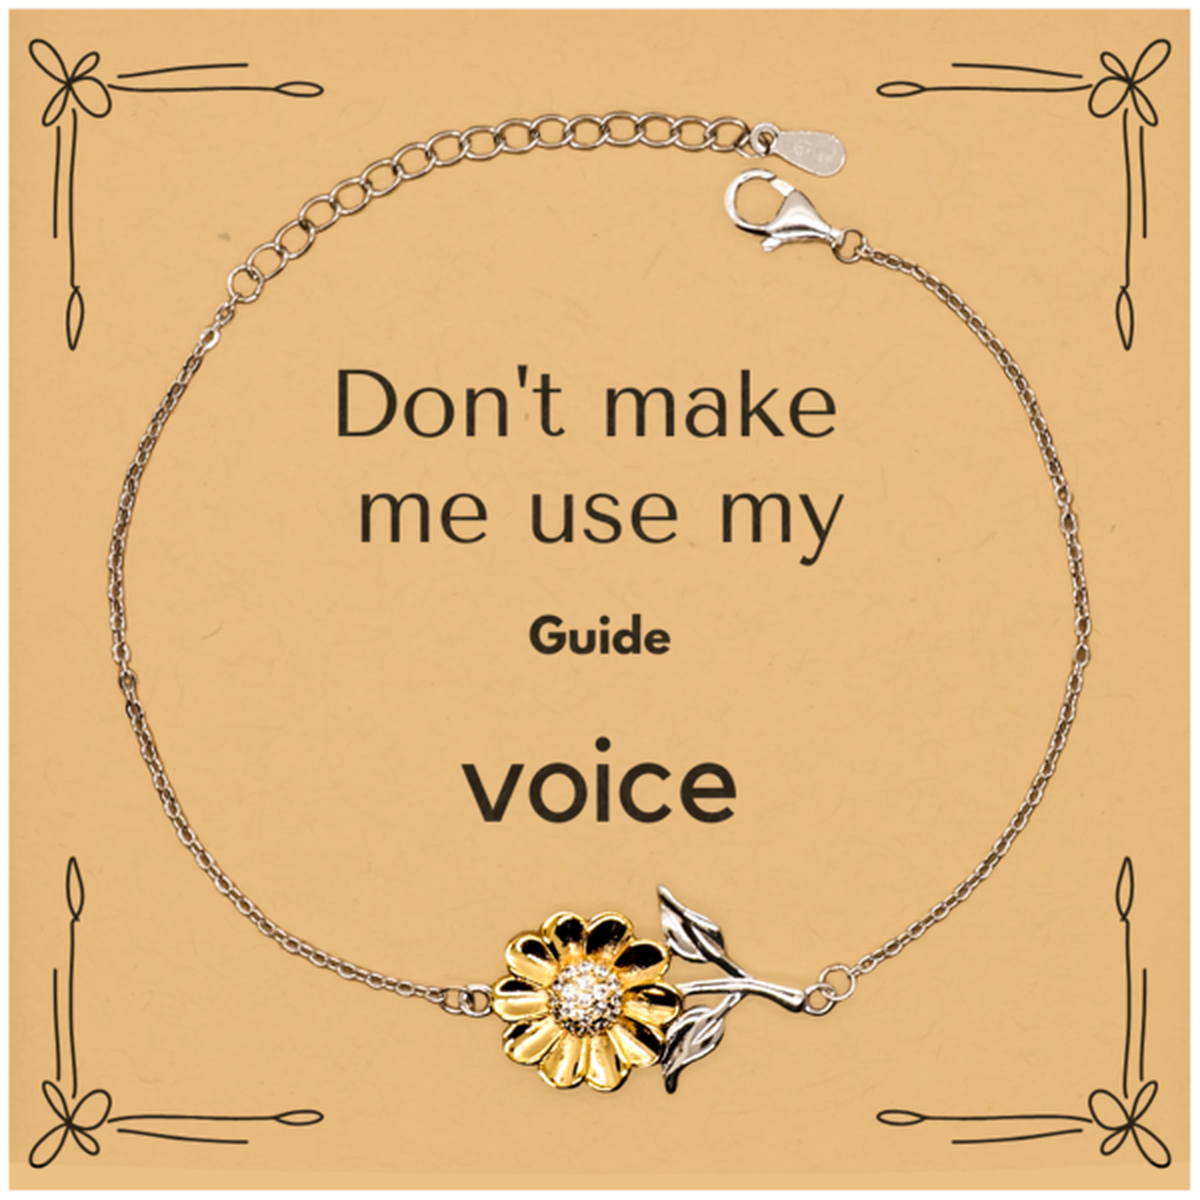 Don't make me use my Guide voice, Sarcasm Guide Card Gifts, Christmas Guide Sunflower Bracelet Birthday Unique Gifts For Guide Coworkers, Men, Women, Colleague, Friends